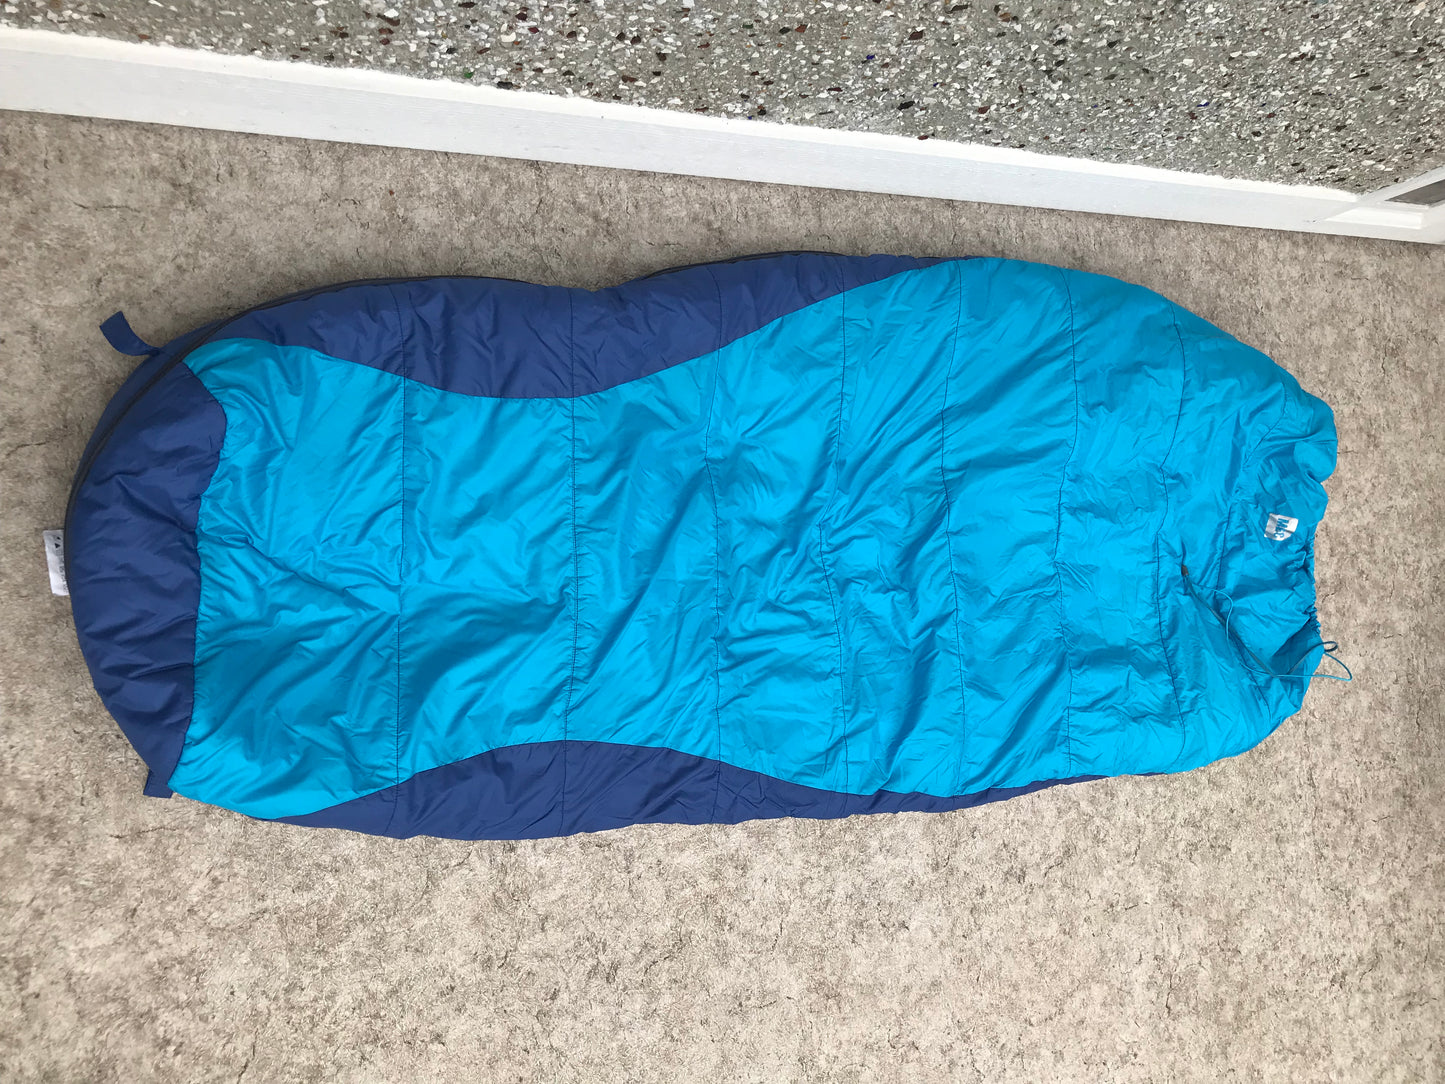 Camping Adventures MEC Oasis Sleeping Bag 0 Degree Small Up to 5.6Ft Insulated Hyperloft Blue As New Outstanding Quality